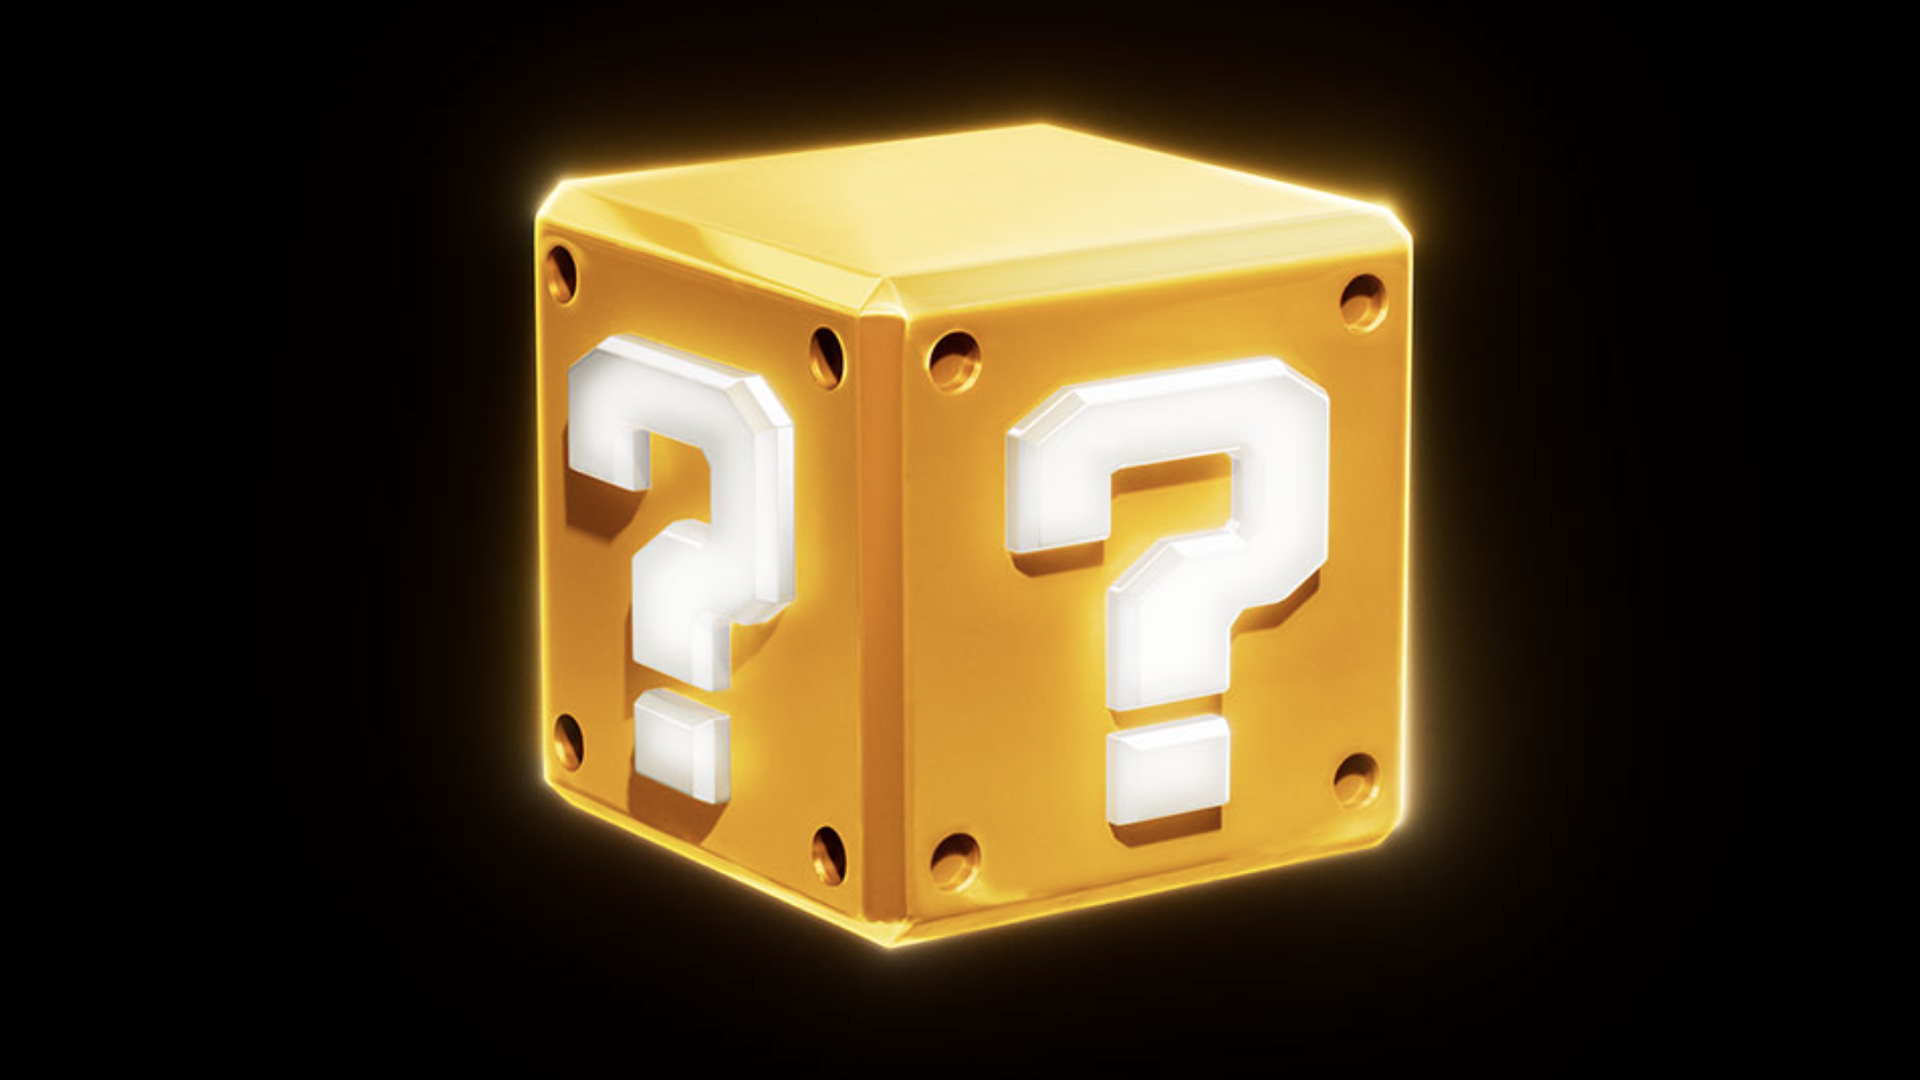 Image of a yellow cube, with a question mark on all sides.